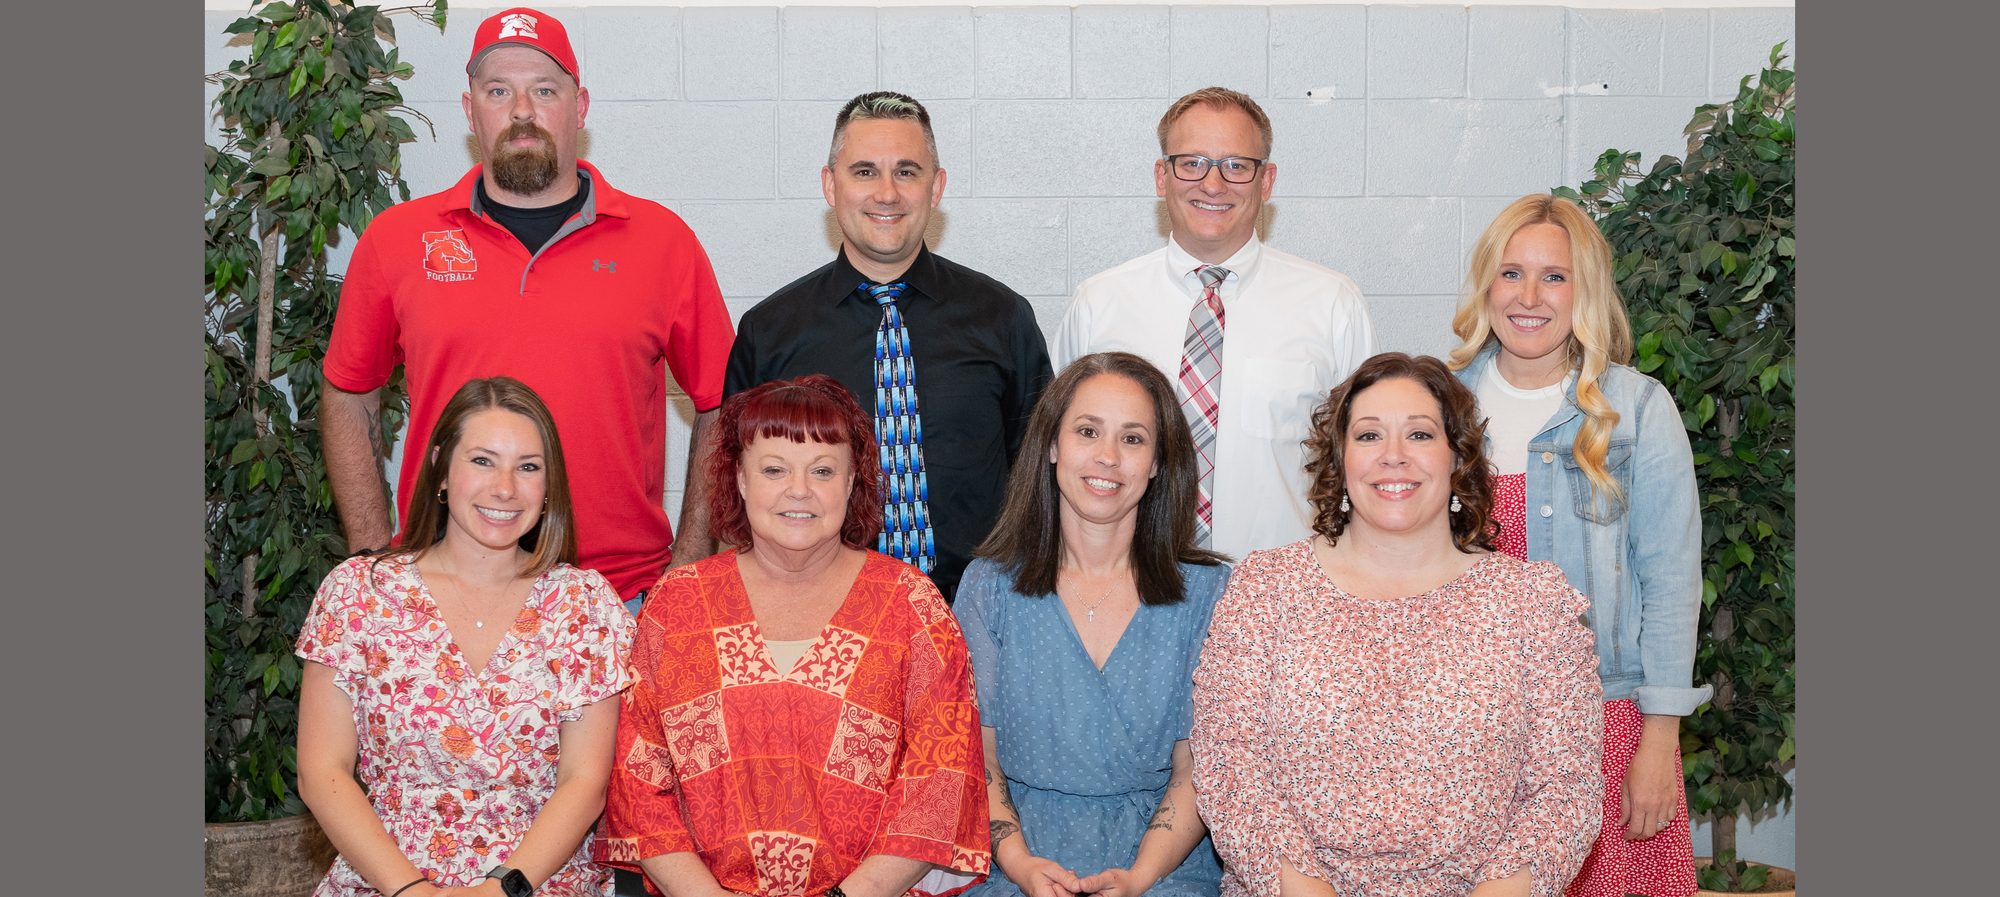 Broncho Team Members who recevied special recognition and awards this school year